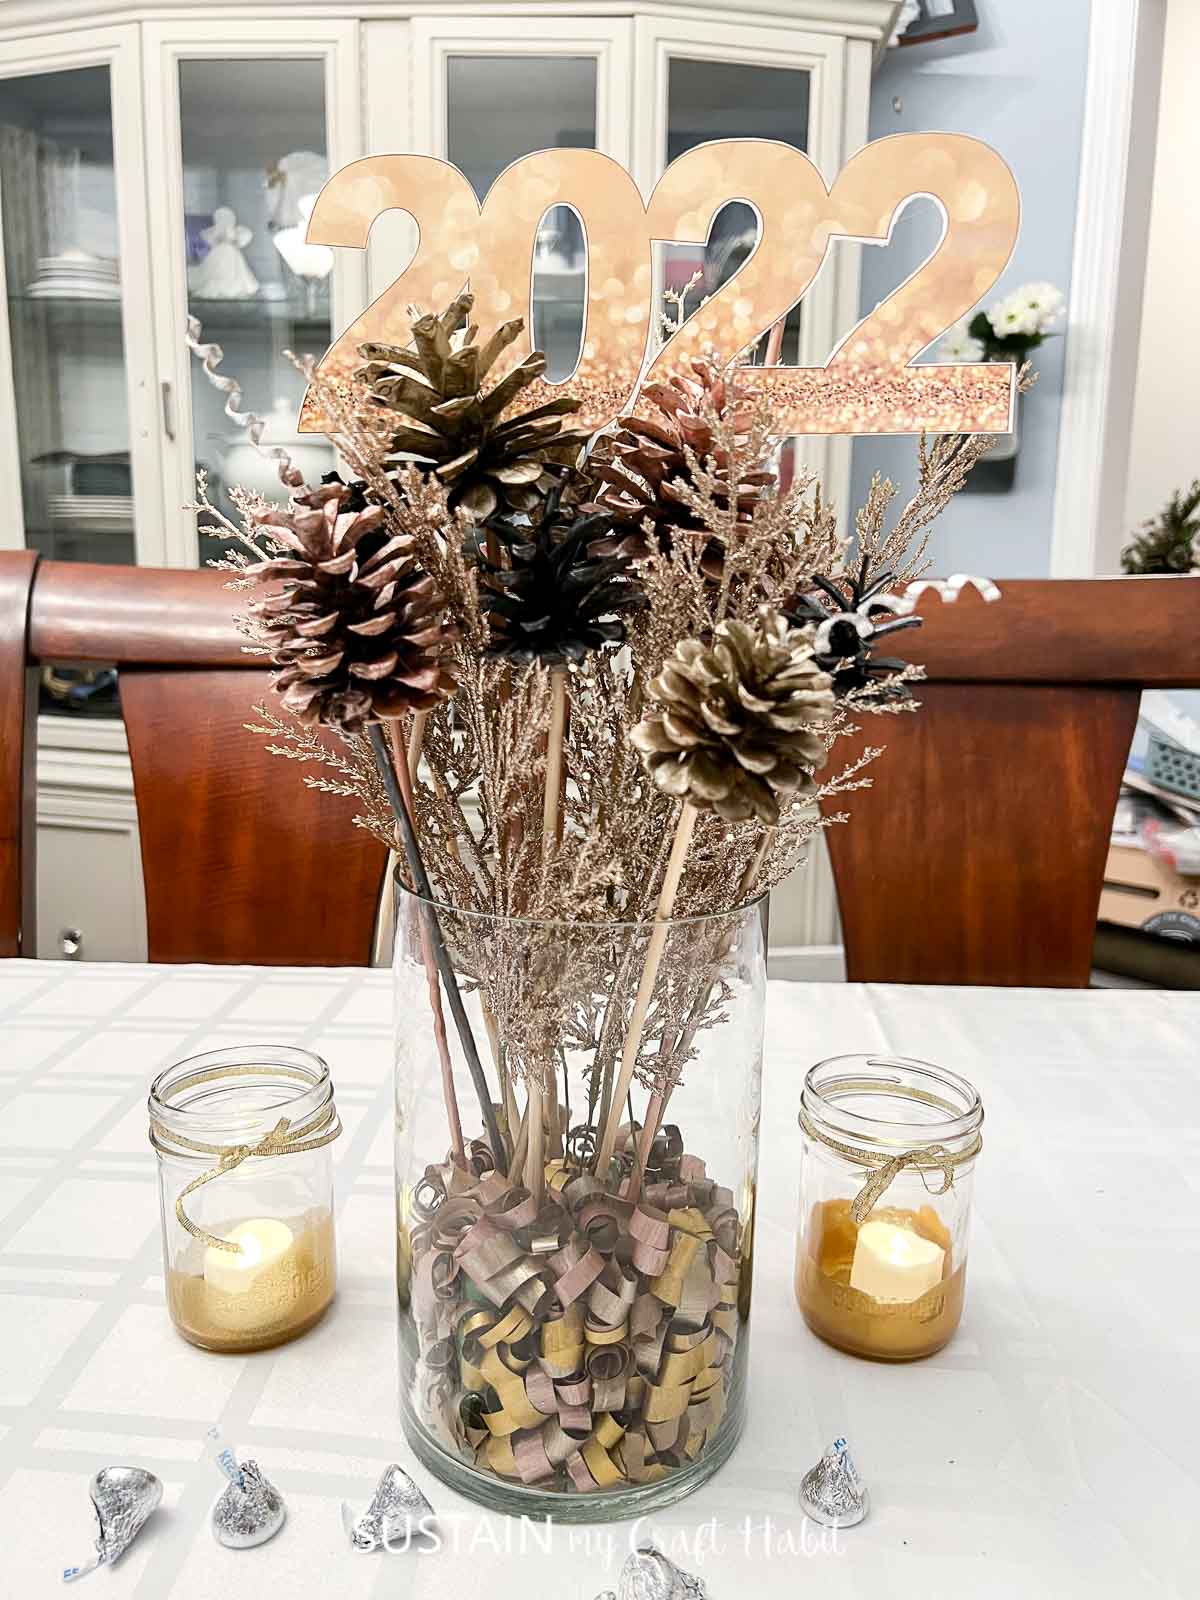 A centerpiece on a dining room table. The centerpiece is made with pine cones painted in gold, rose gold and black metallic colors. A gold 2020 sign is on the top.